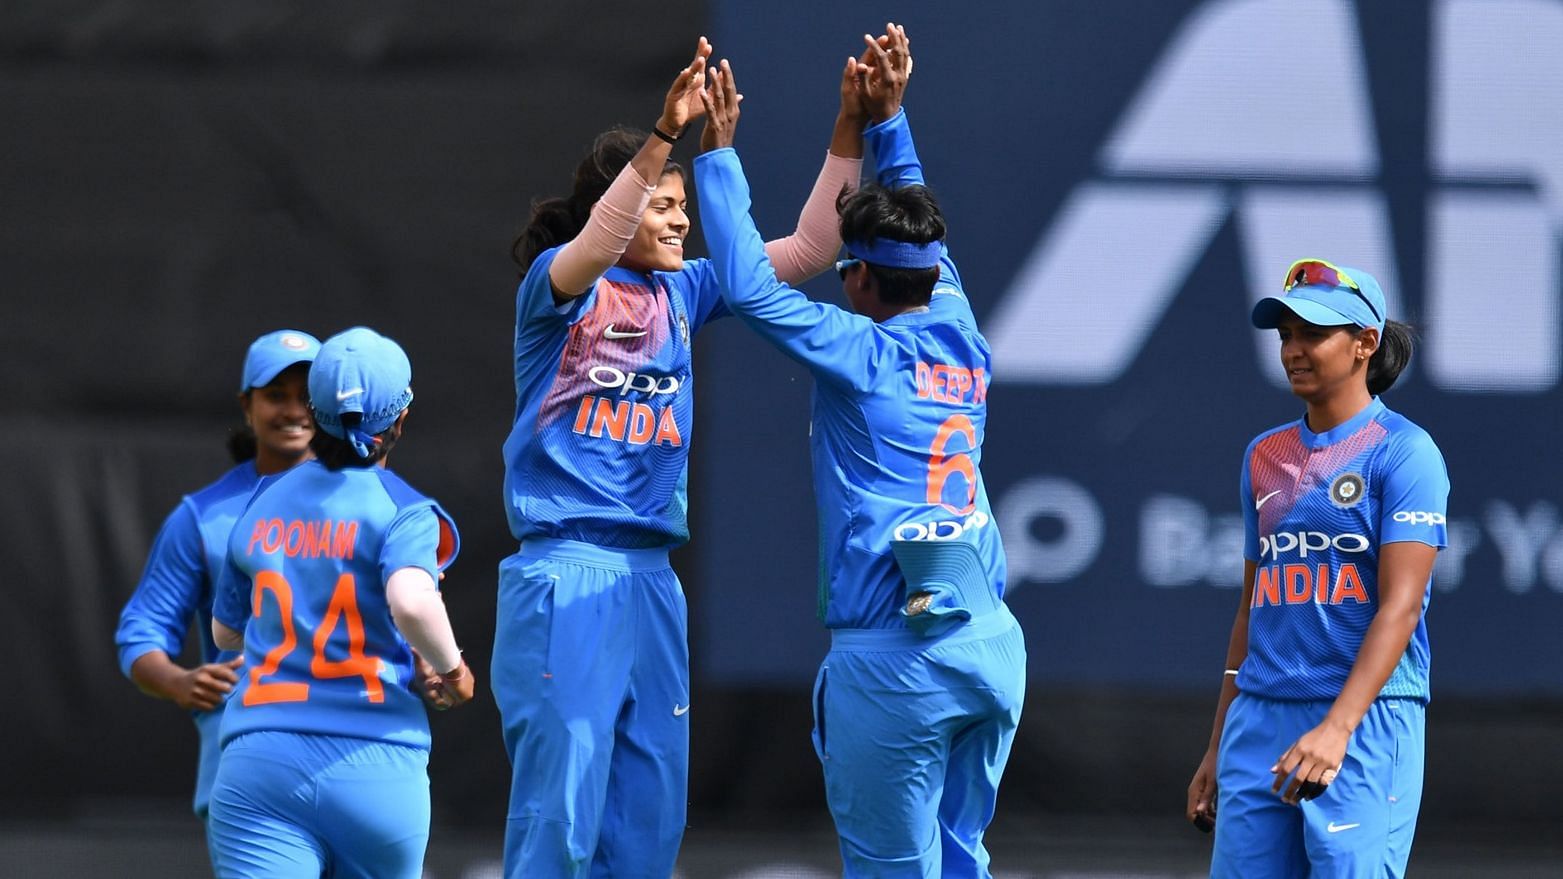 The Indian women’s cricket team registered an emphatic 10-wicket win over the West Indies in the second T20 International in St Lucia.